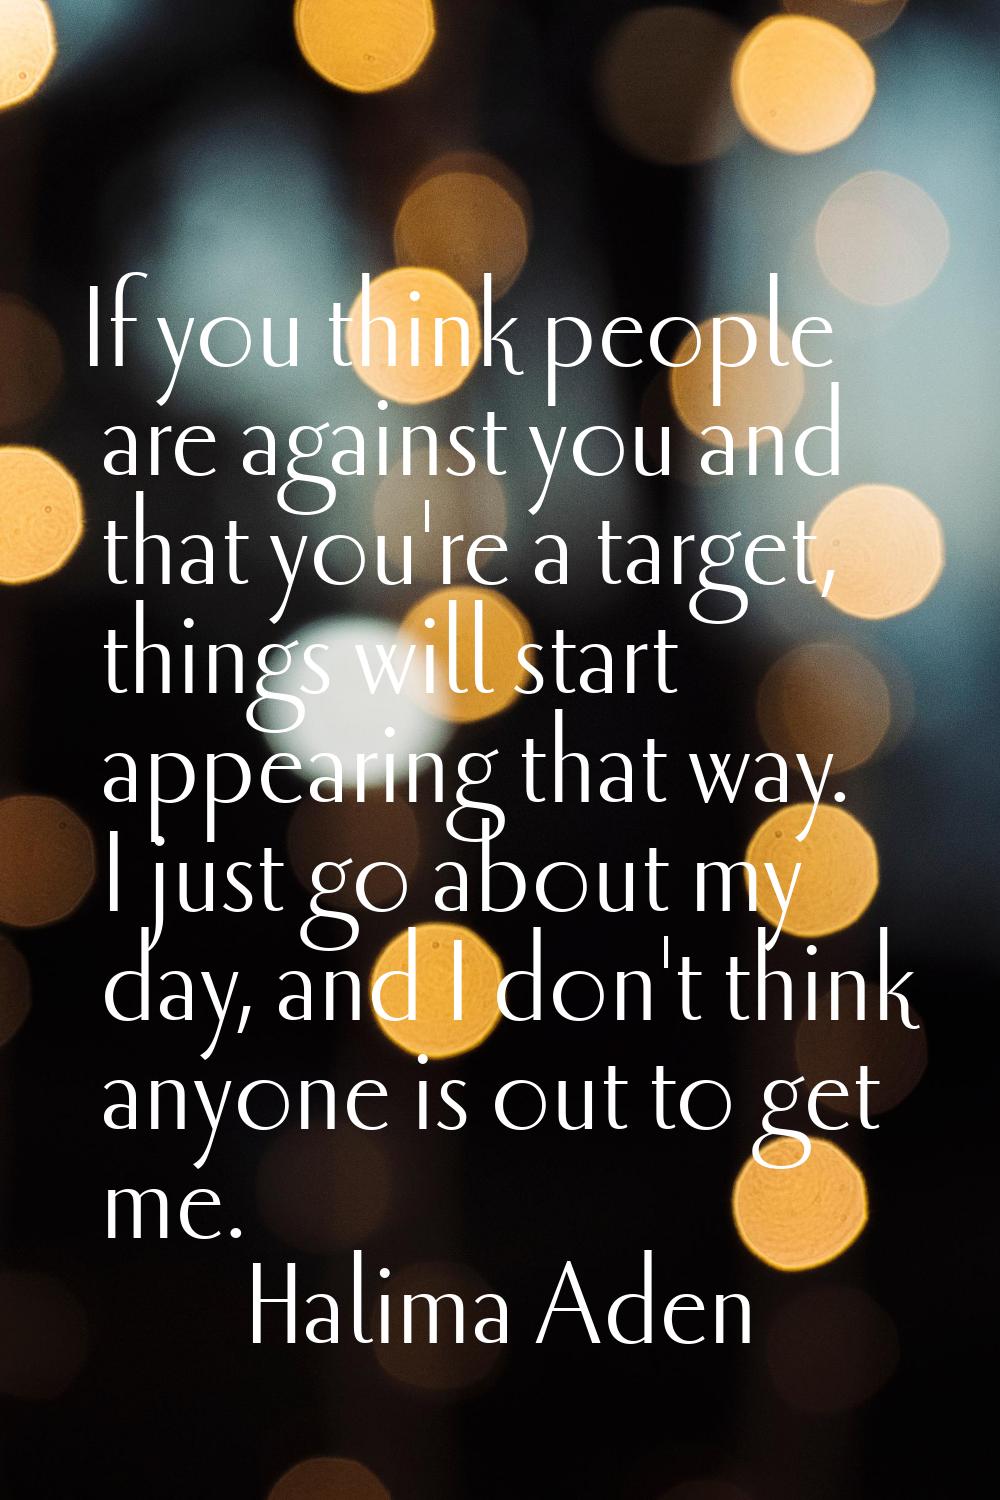 If you think people are against you and that you're a target, things will start appearing that way.